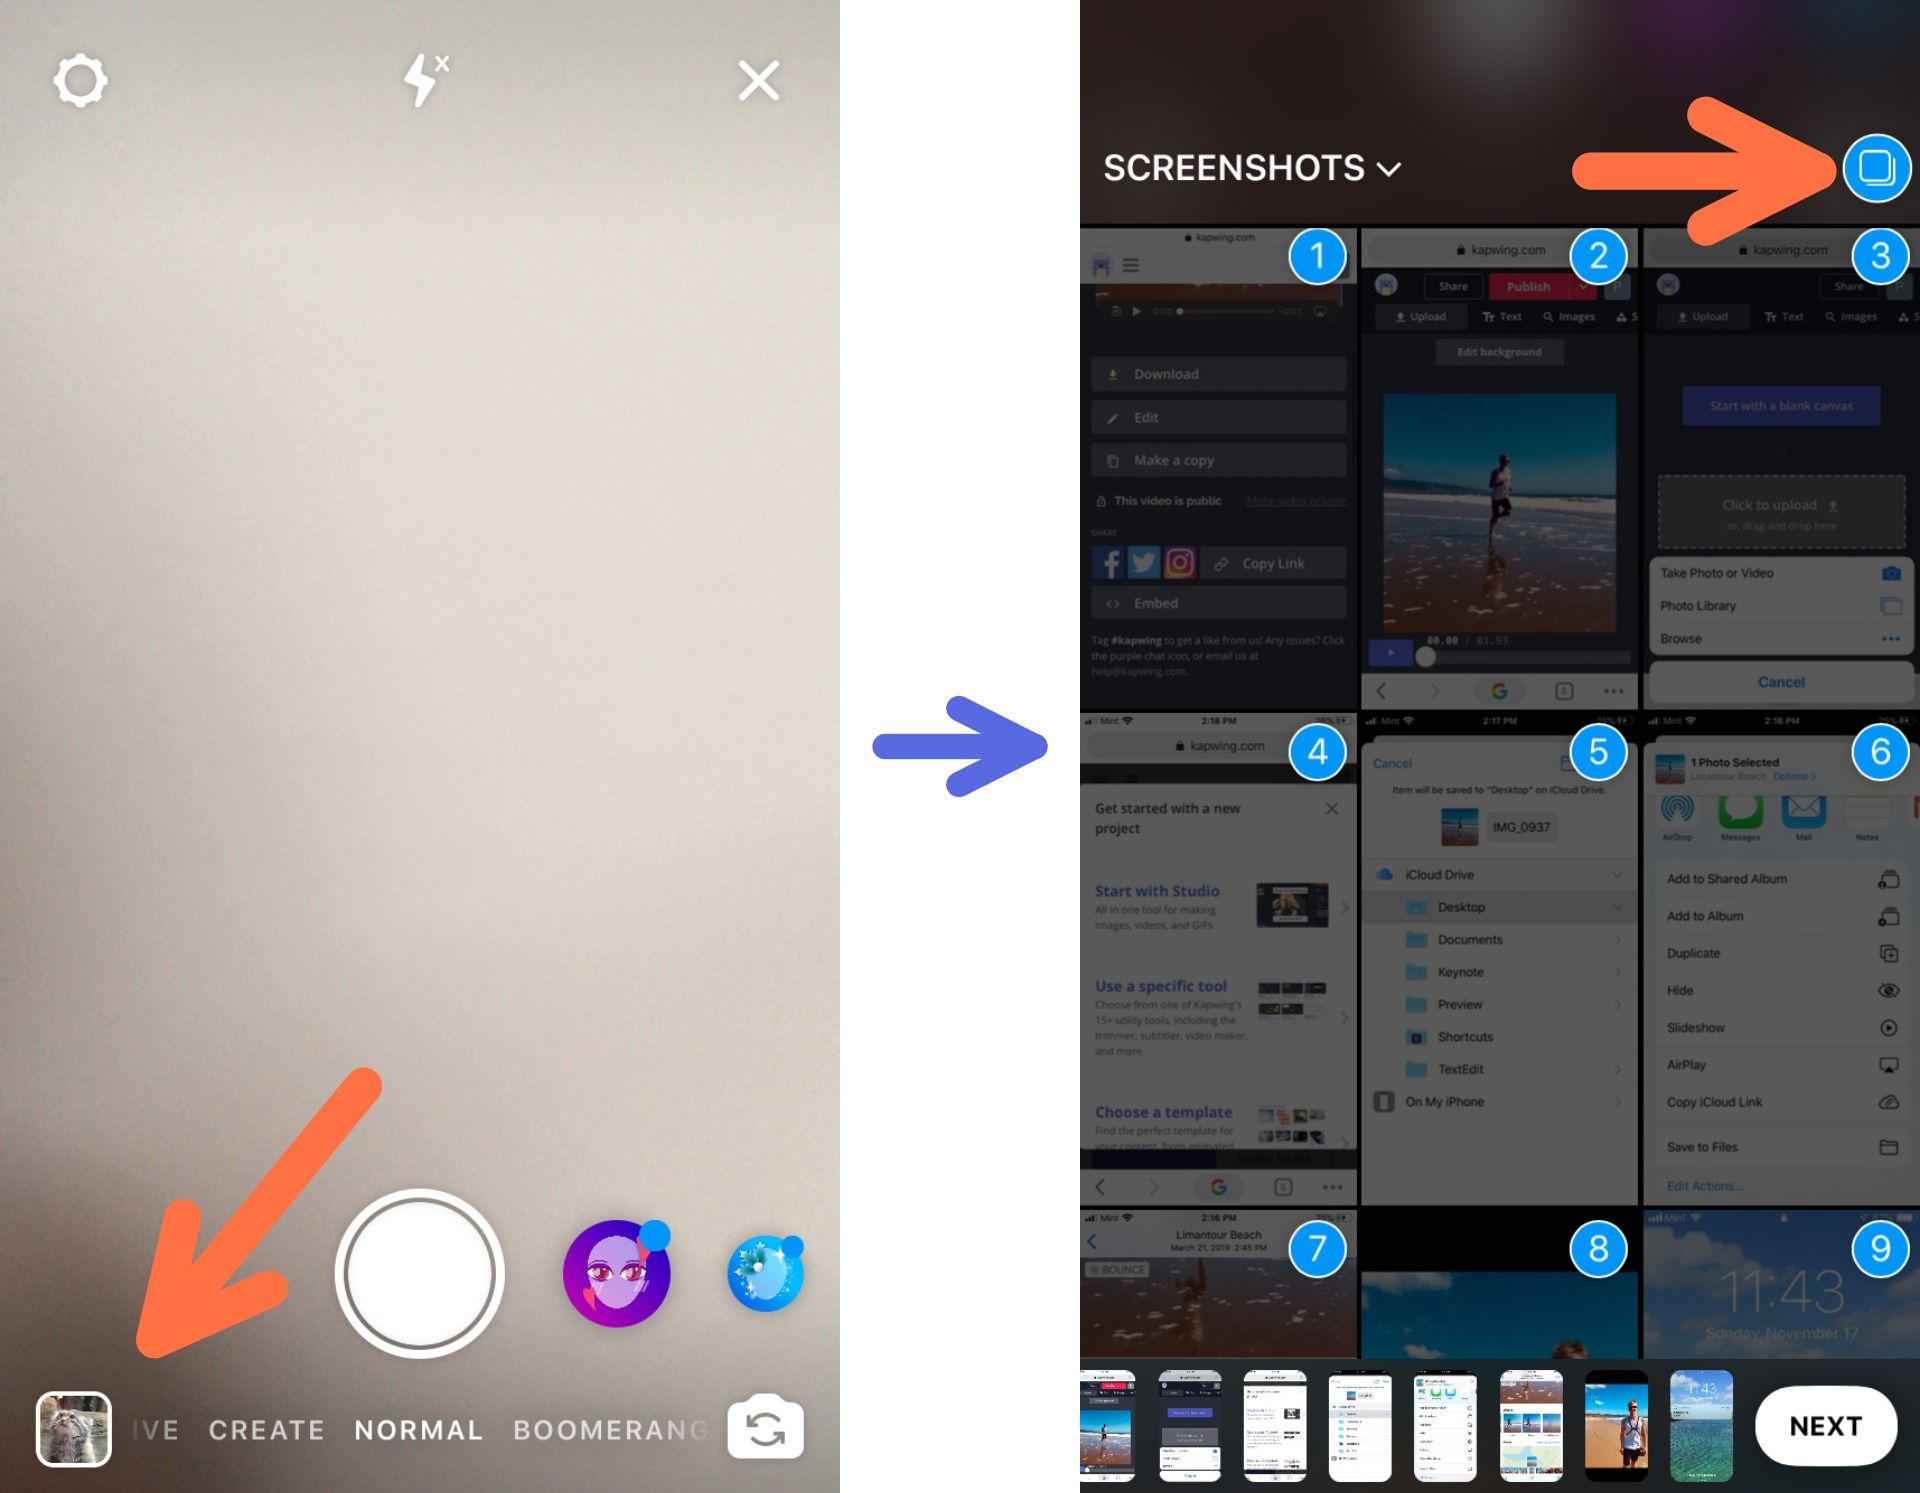 Screenshots showing how to add several back-to-back images to your Instagram Story at once.